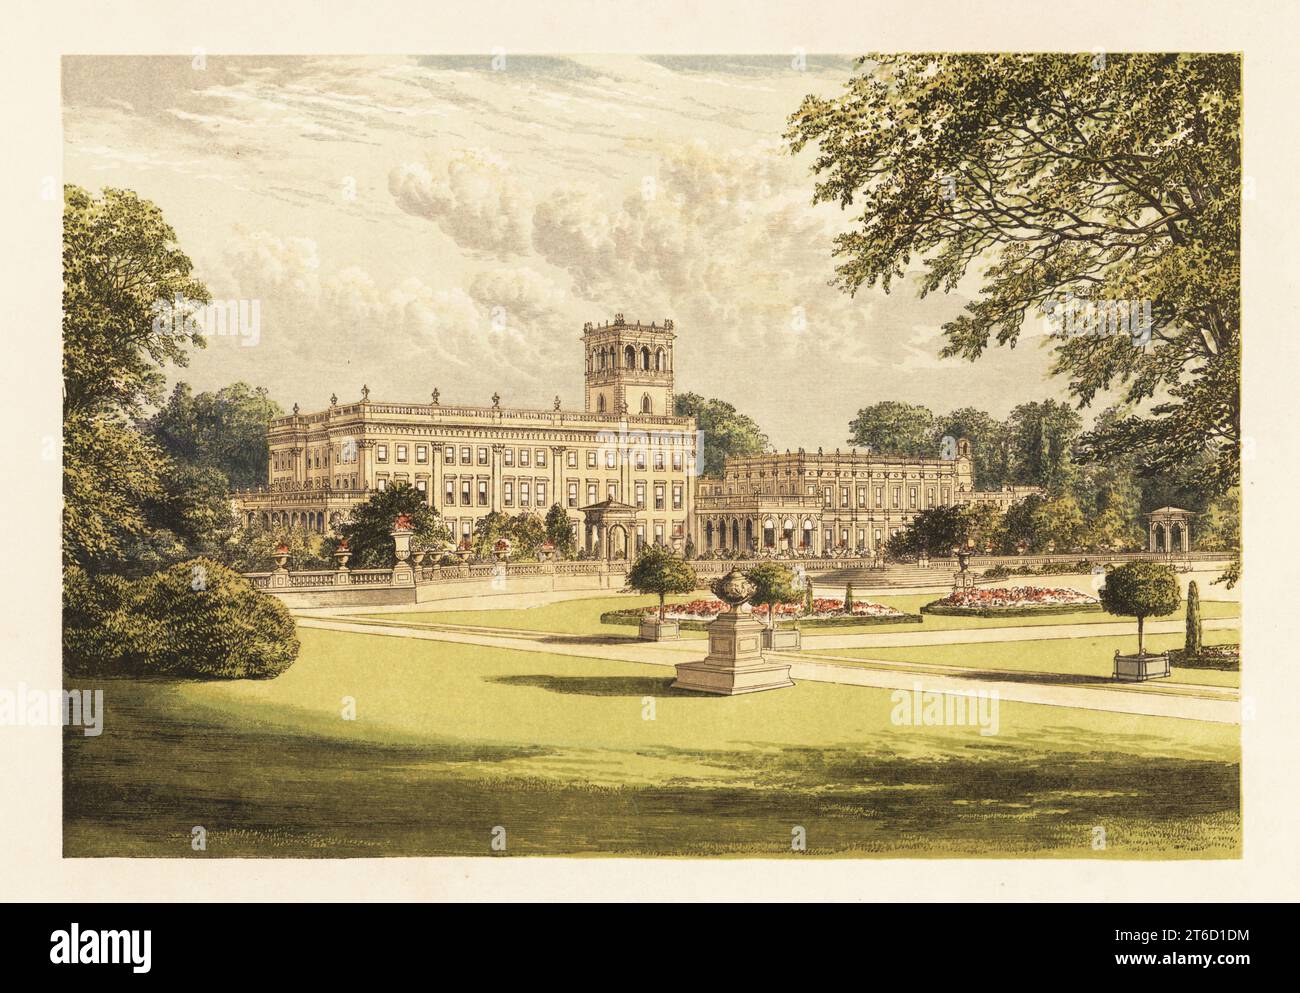 Trentham Hall, Staffordshire, England. Italianate house designed by Charles Barry built from 1833 to 1842 in park grounds landscaped by Lancelot Capability Brown in the 18th century. Colour woodblock by Benjamin Fawcett in the Baxter process of an illustration by Alexander Francis Lydon from Reverend Francis Orpen Morriss Picturesque Views of the Seats of Noblemen and Gentlemen of Great Britain and Ireland, William Mackenzie, London, 1880. Stock Photo